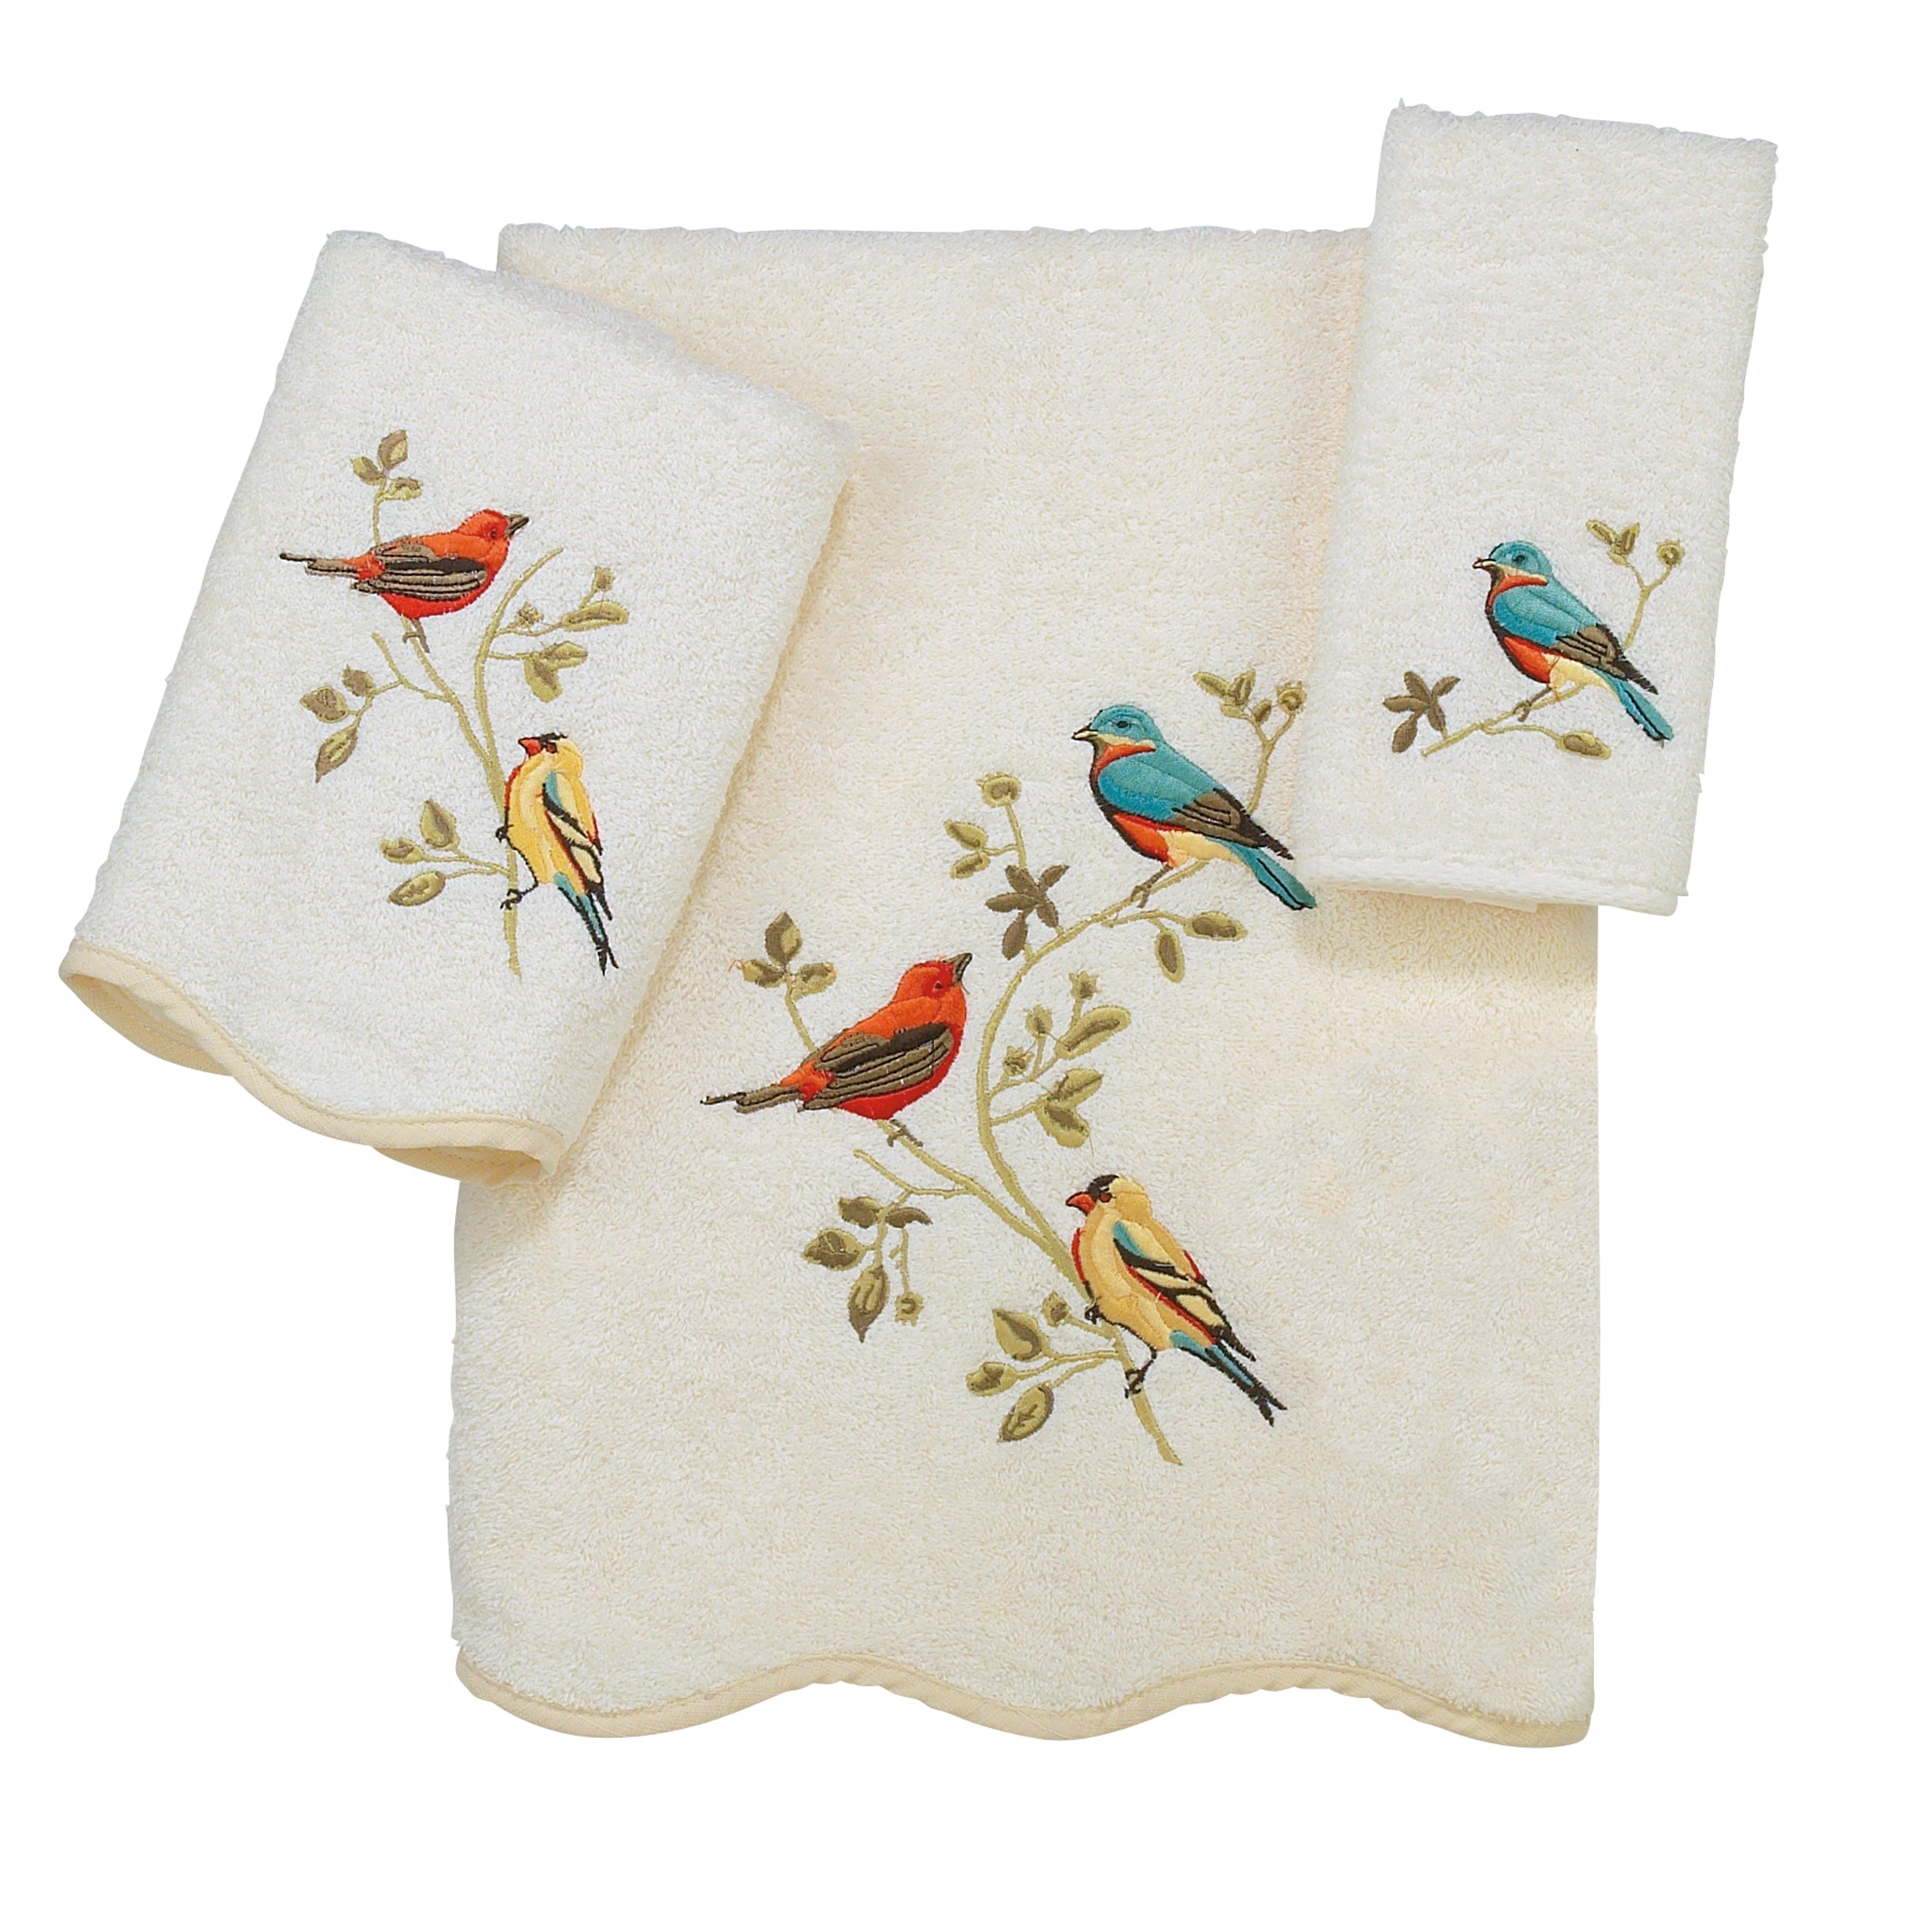 Premier Songbirds Scalloped Towel Collection